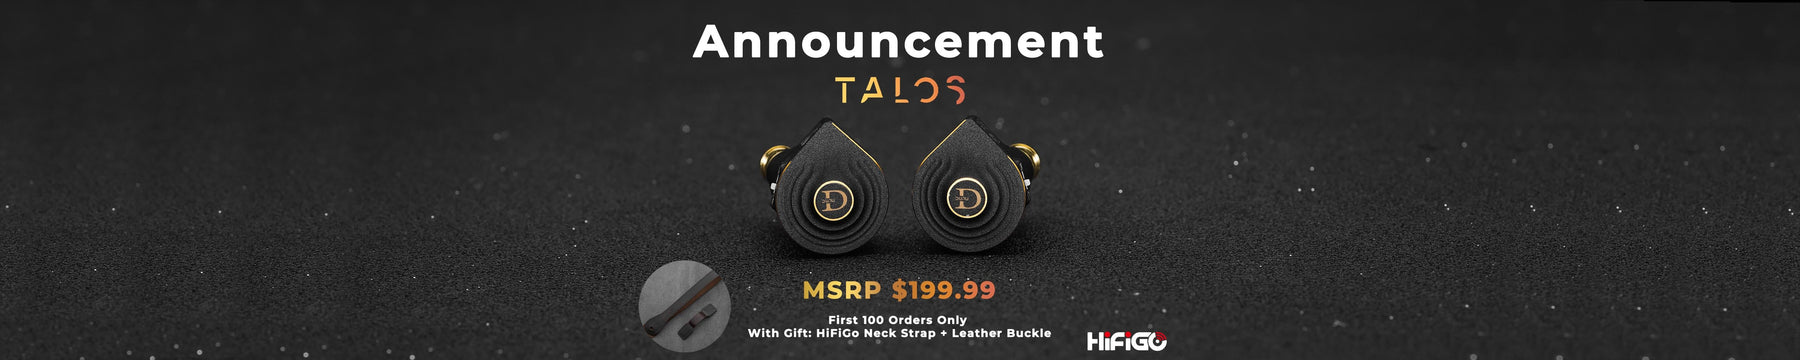 DUNU Talos Launched On Pre-Order: Planar and Dual BA Driver Hybrid With Brass Cavity Structure